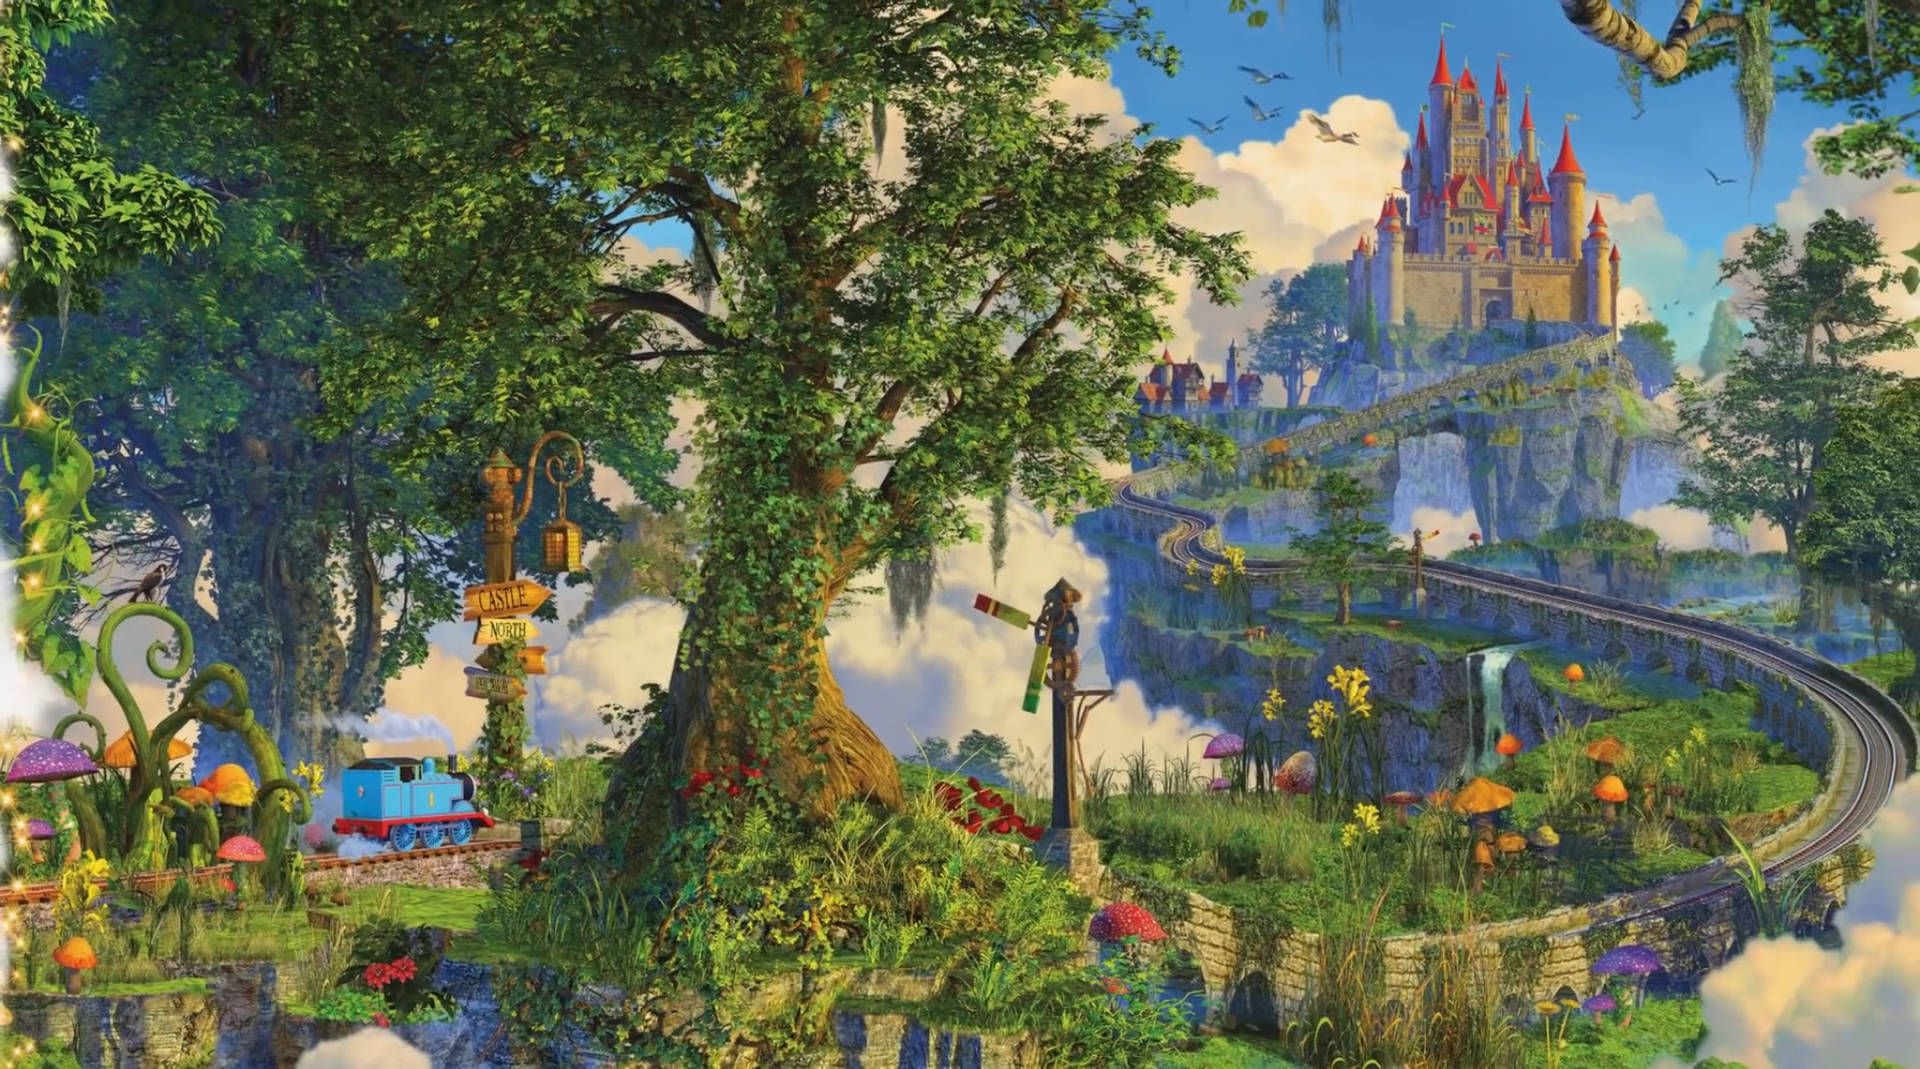 Grand Castle In An Enchanted Land Picture